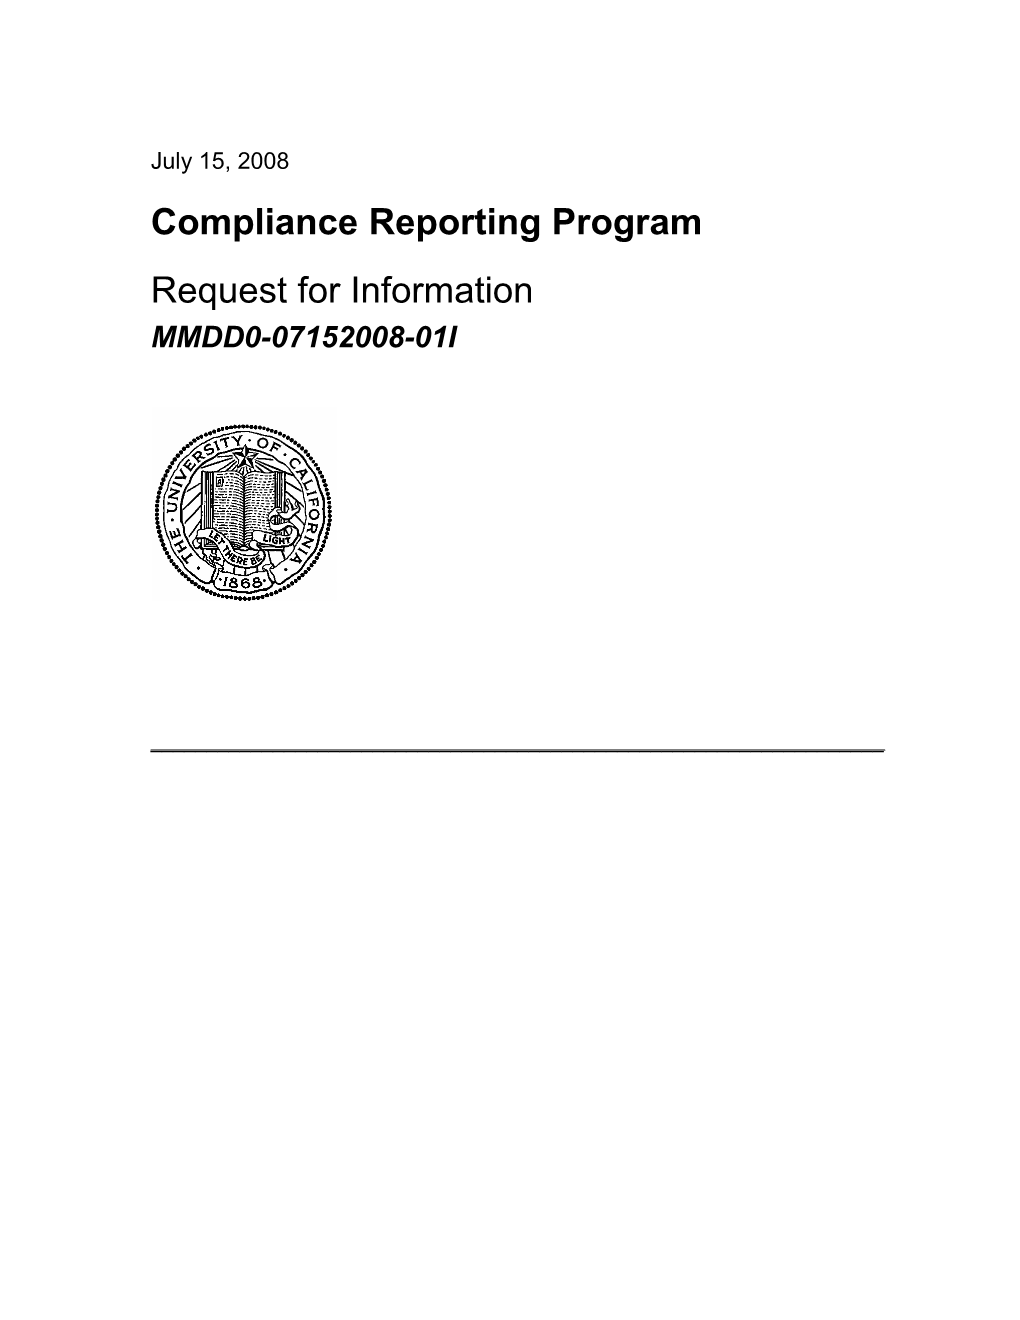 Request for Information Ethics and Compliance Investigations Services